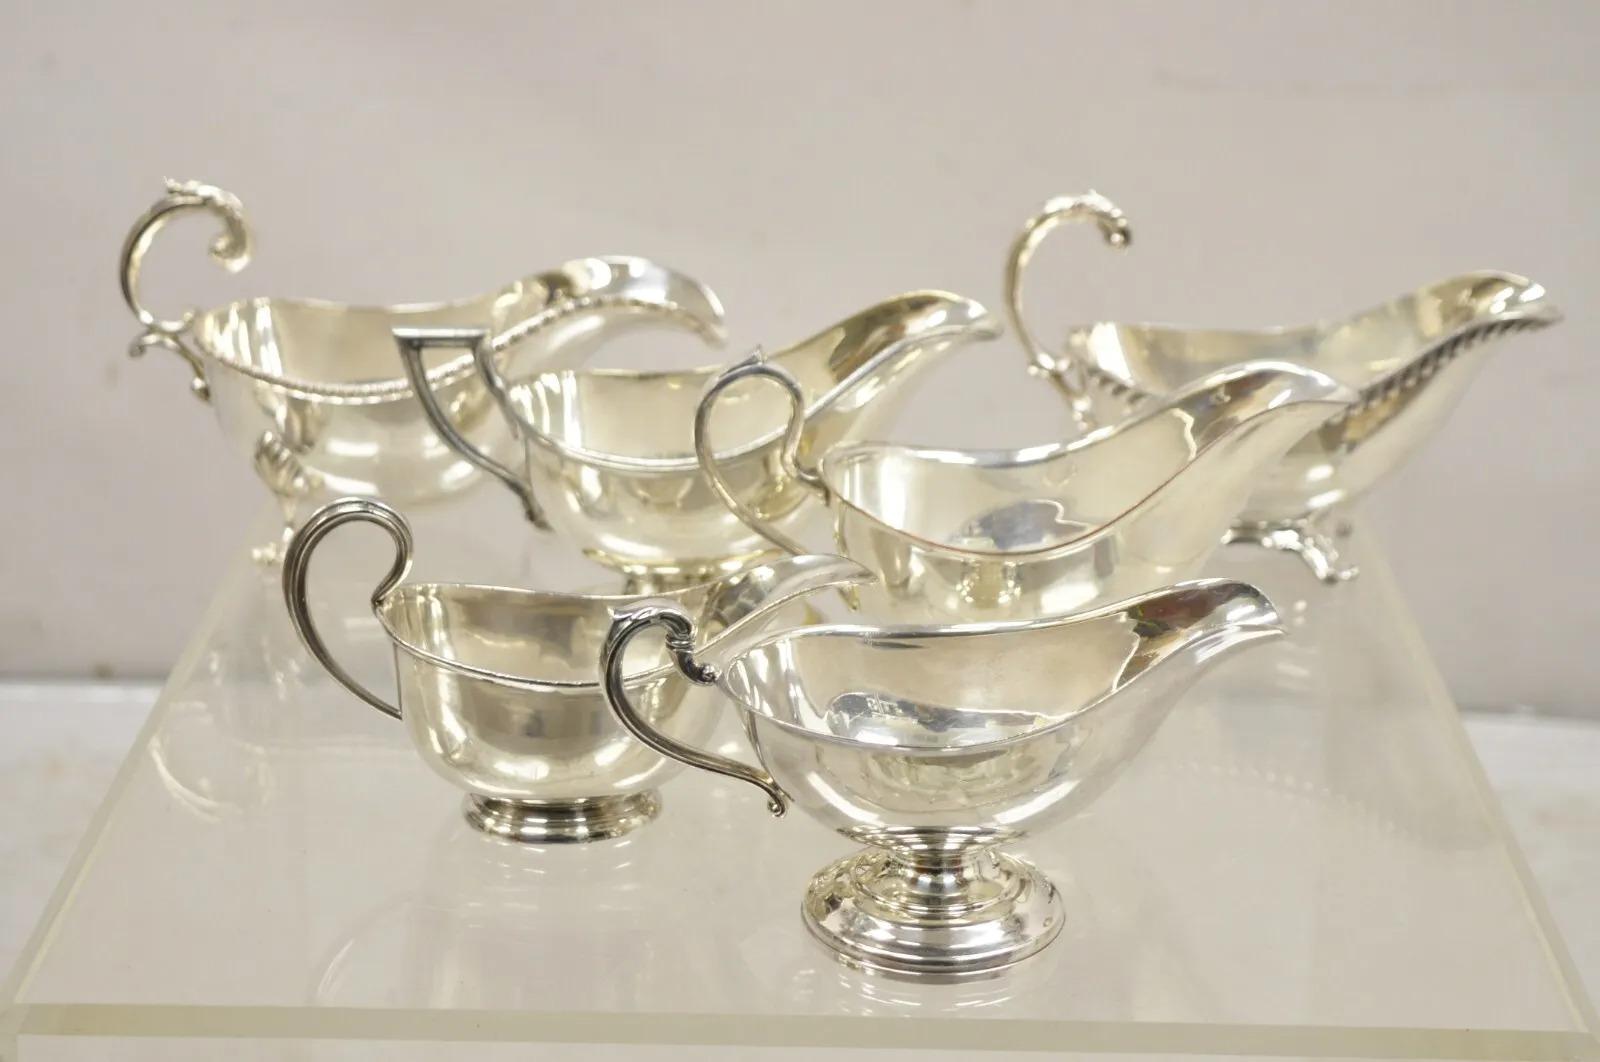 Vintage Silver Plated Victorian Serving Gravy Boat Sauce Boats - Lot of 6 For Sale 7